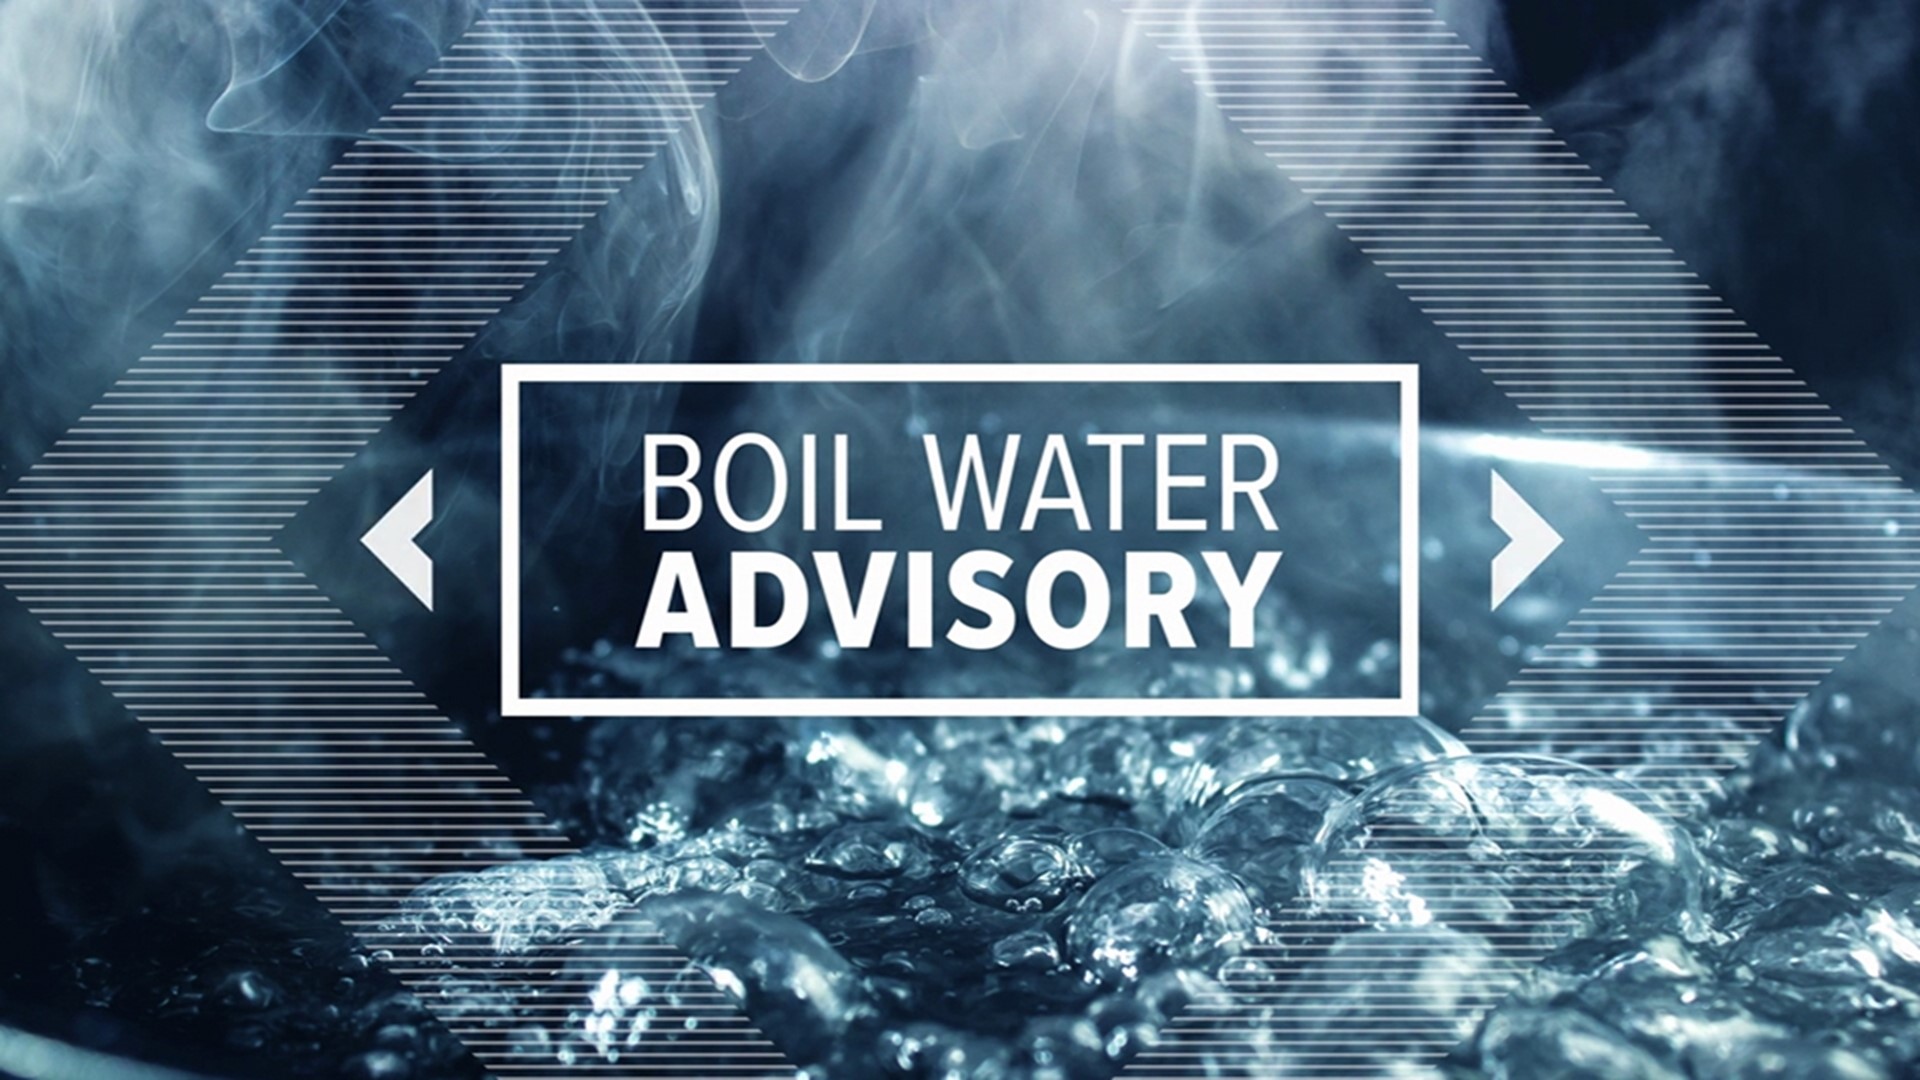 MLGW says multiple water main breaks across the Memphis area have led to low water pressure. All residents should boil water for 3 minutes before using.